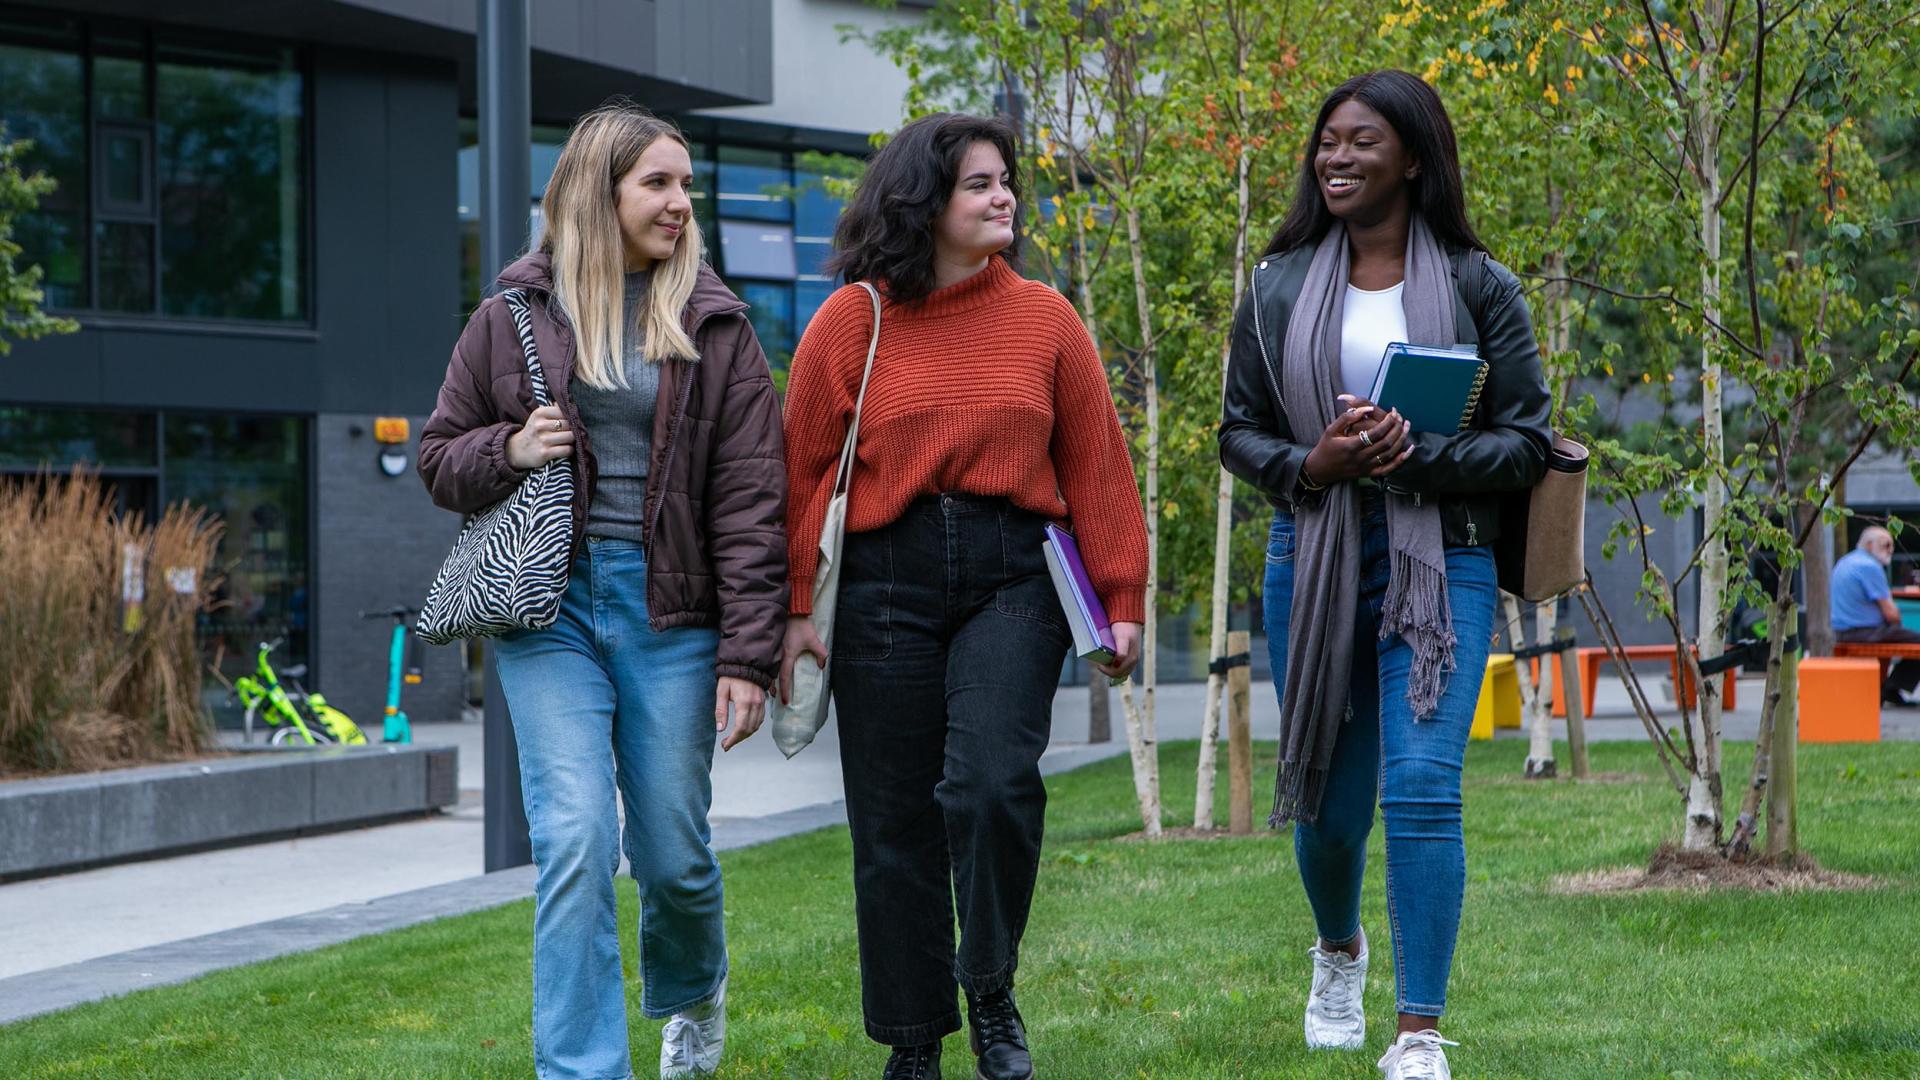 shows three female students walking together on DCU's Glasnevin campus